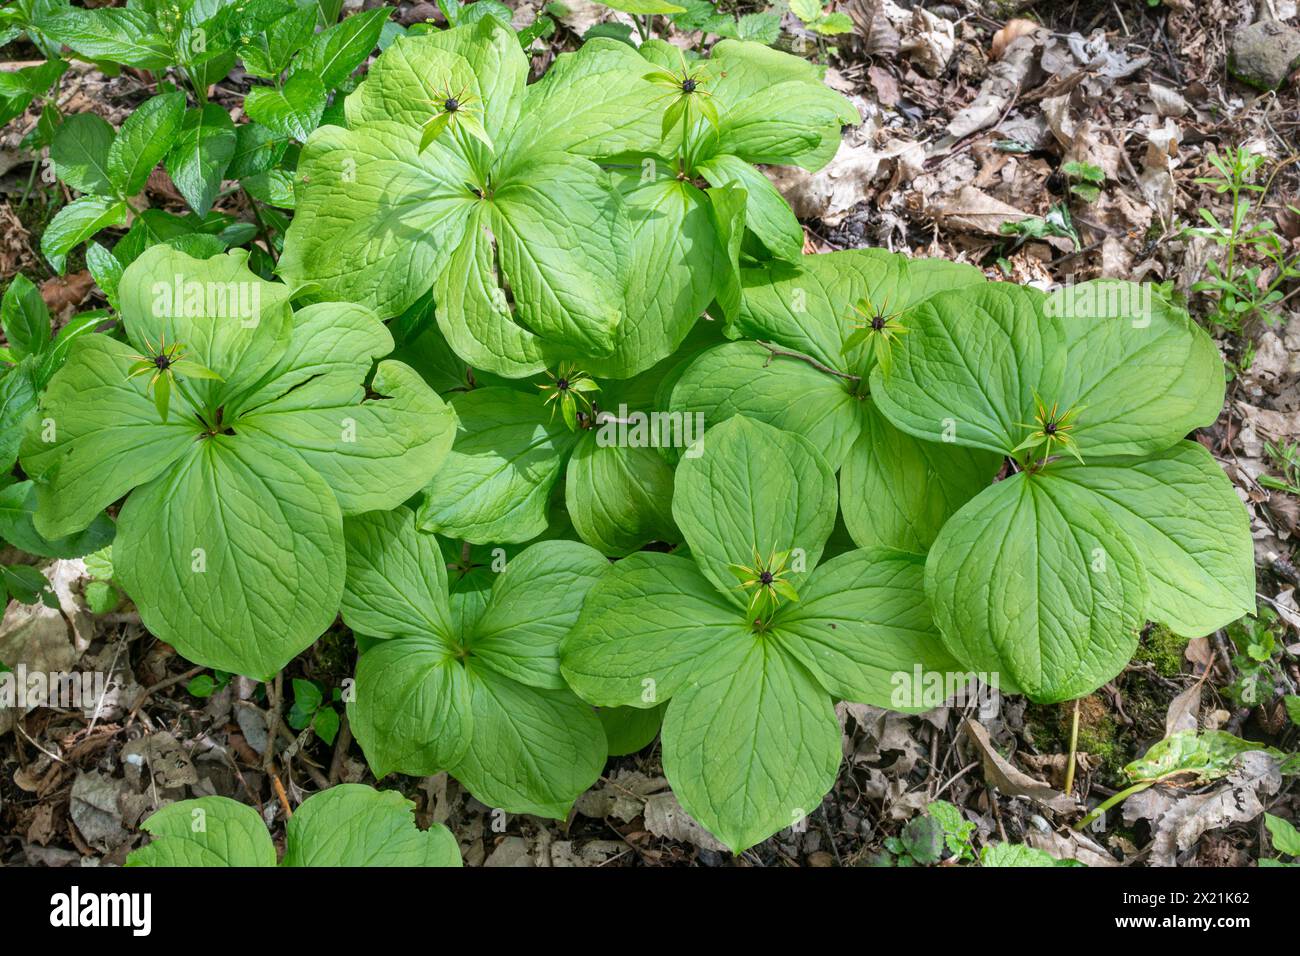 Herb paris (Paris quadrifolia) growing in a patch in wet woodlands, Hampshire, England, UK, during April or spring Stock Photo